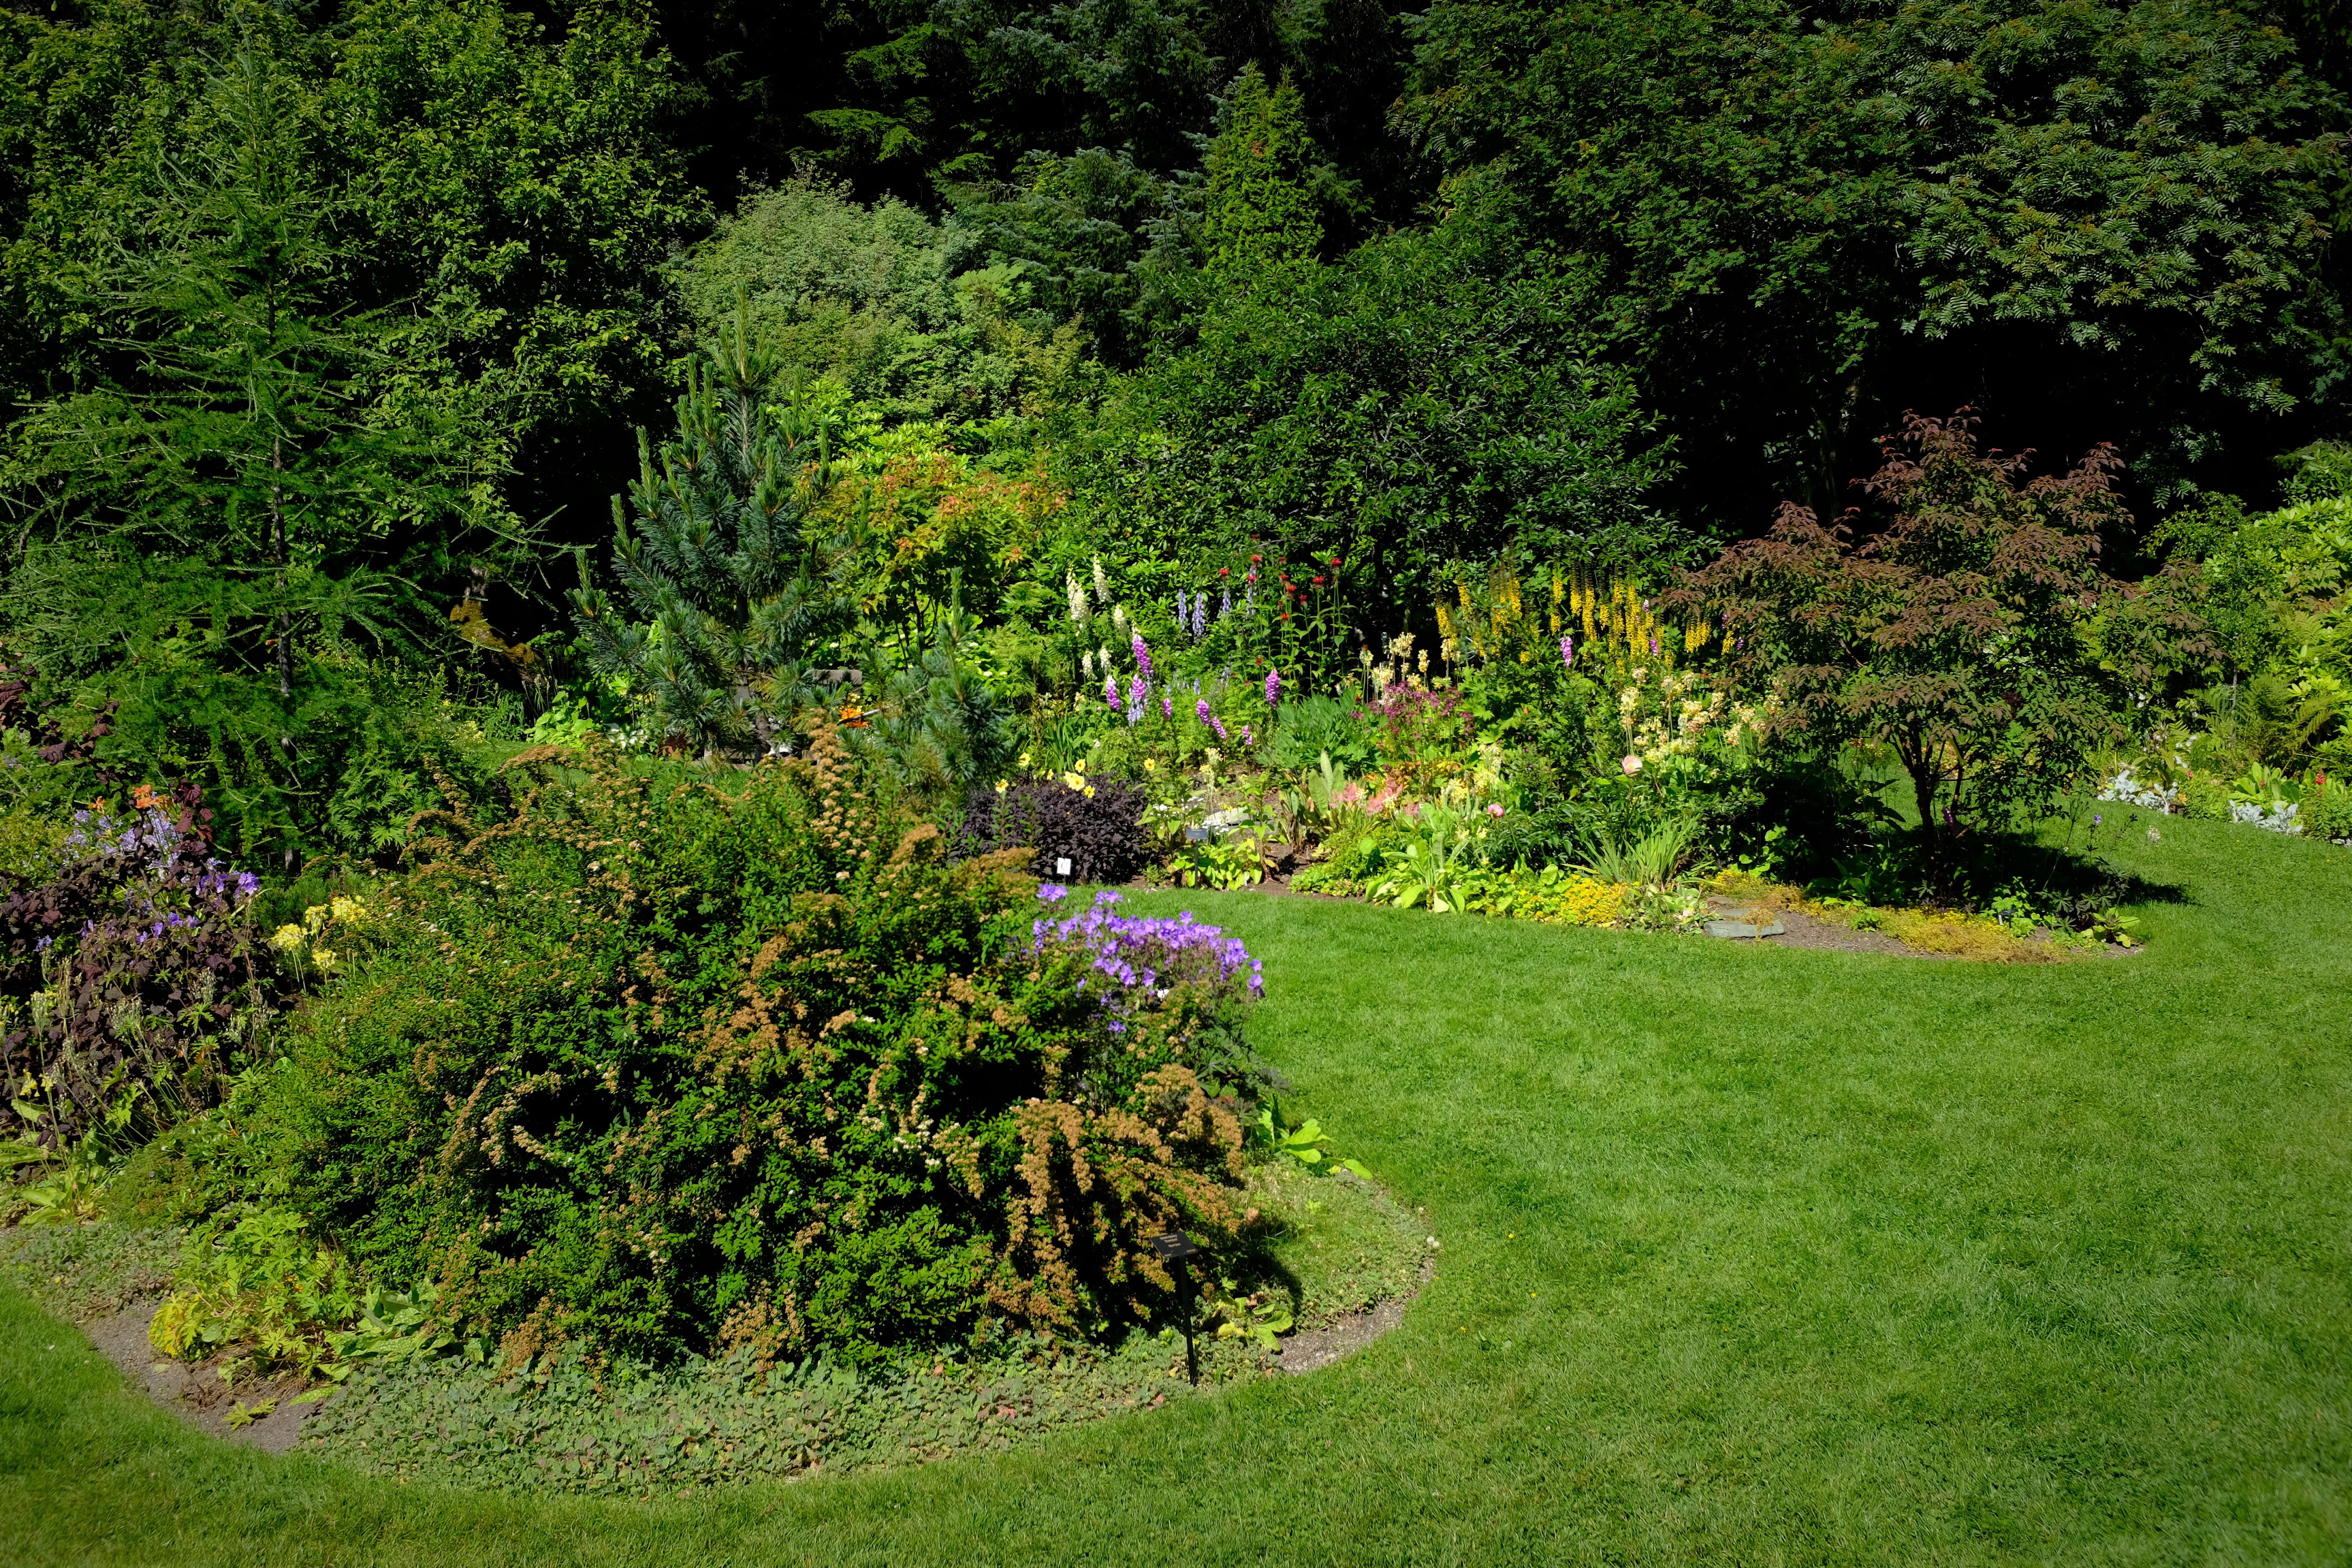 View of flower beds and manicured lawns - Arboretum